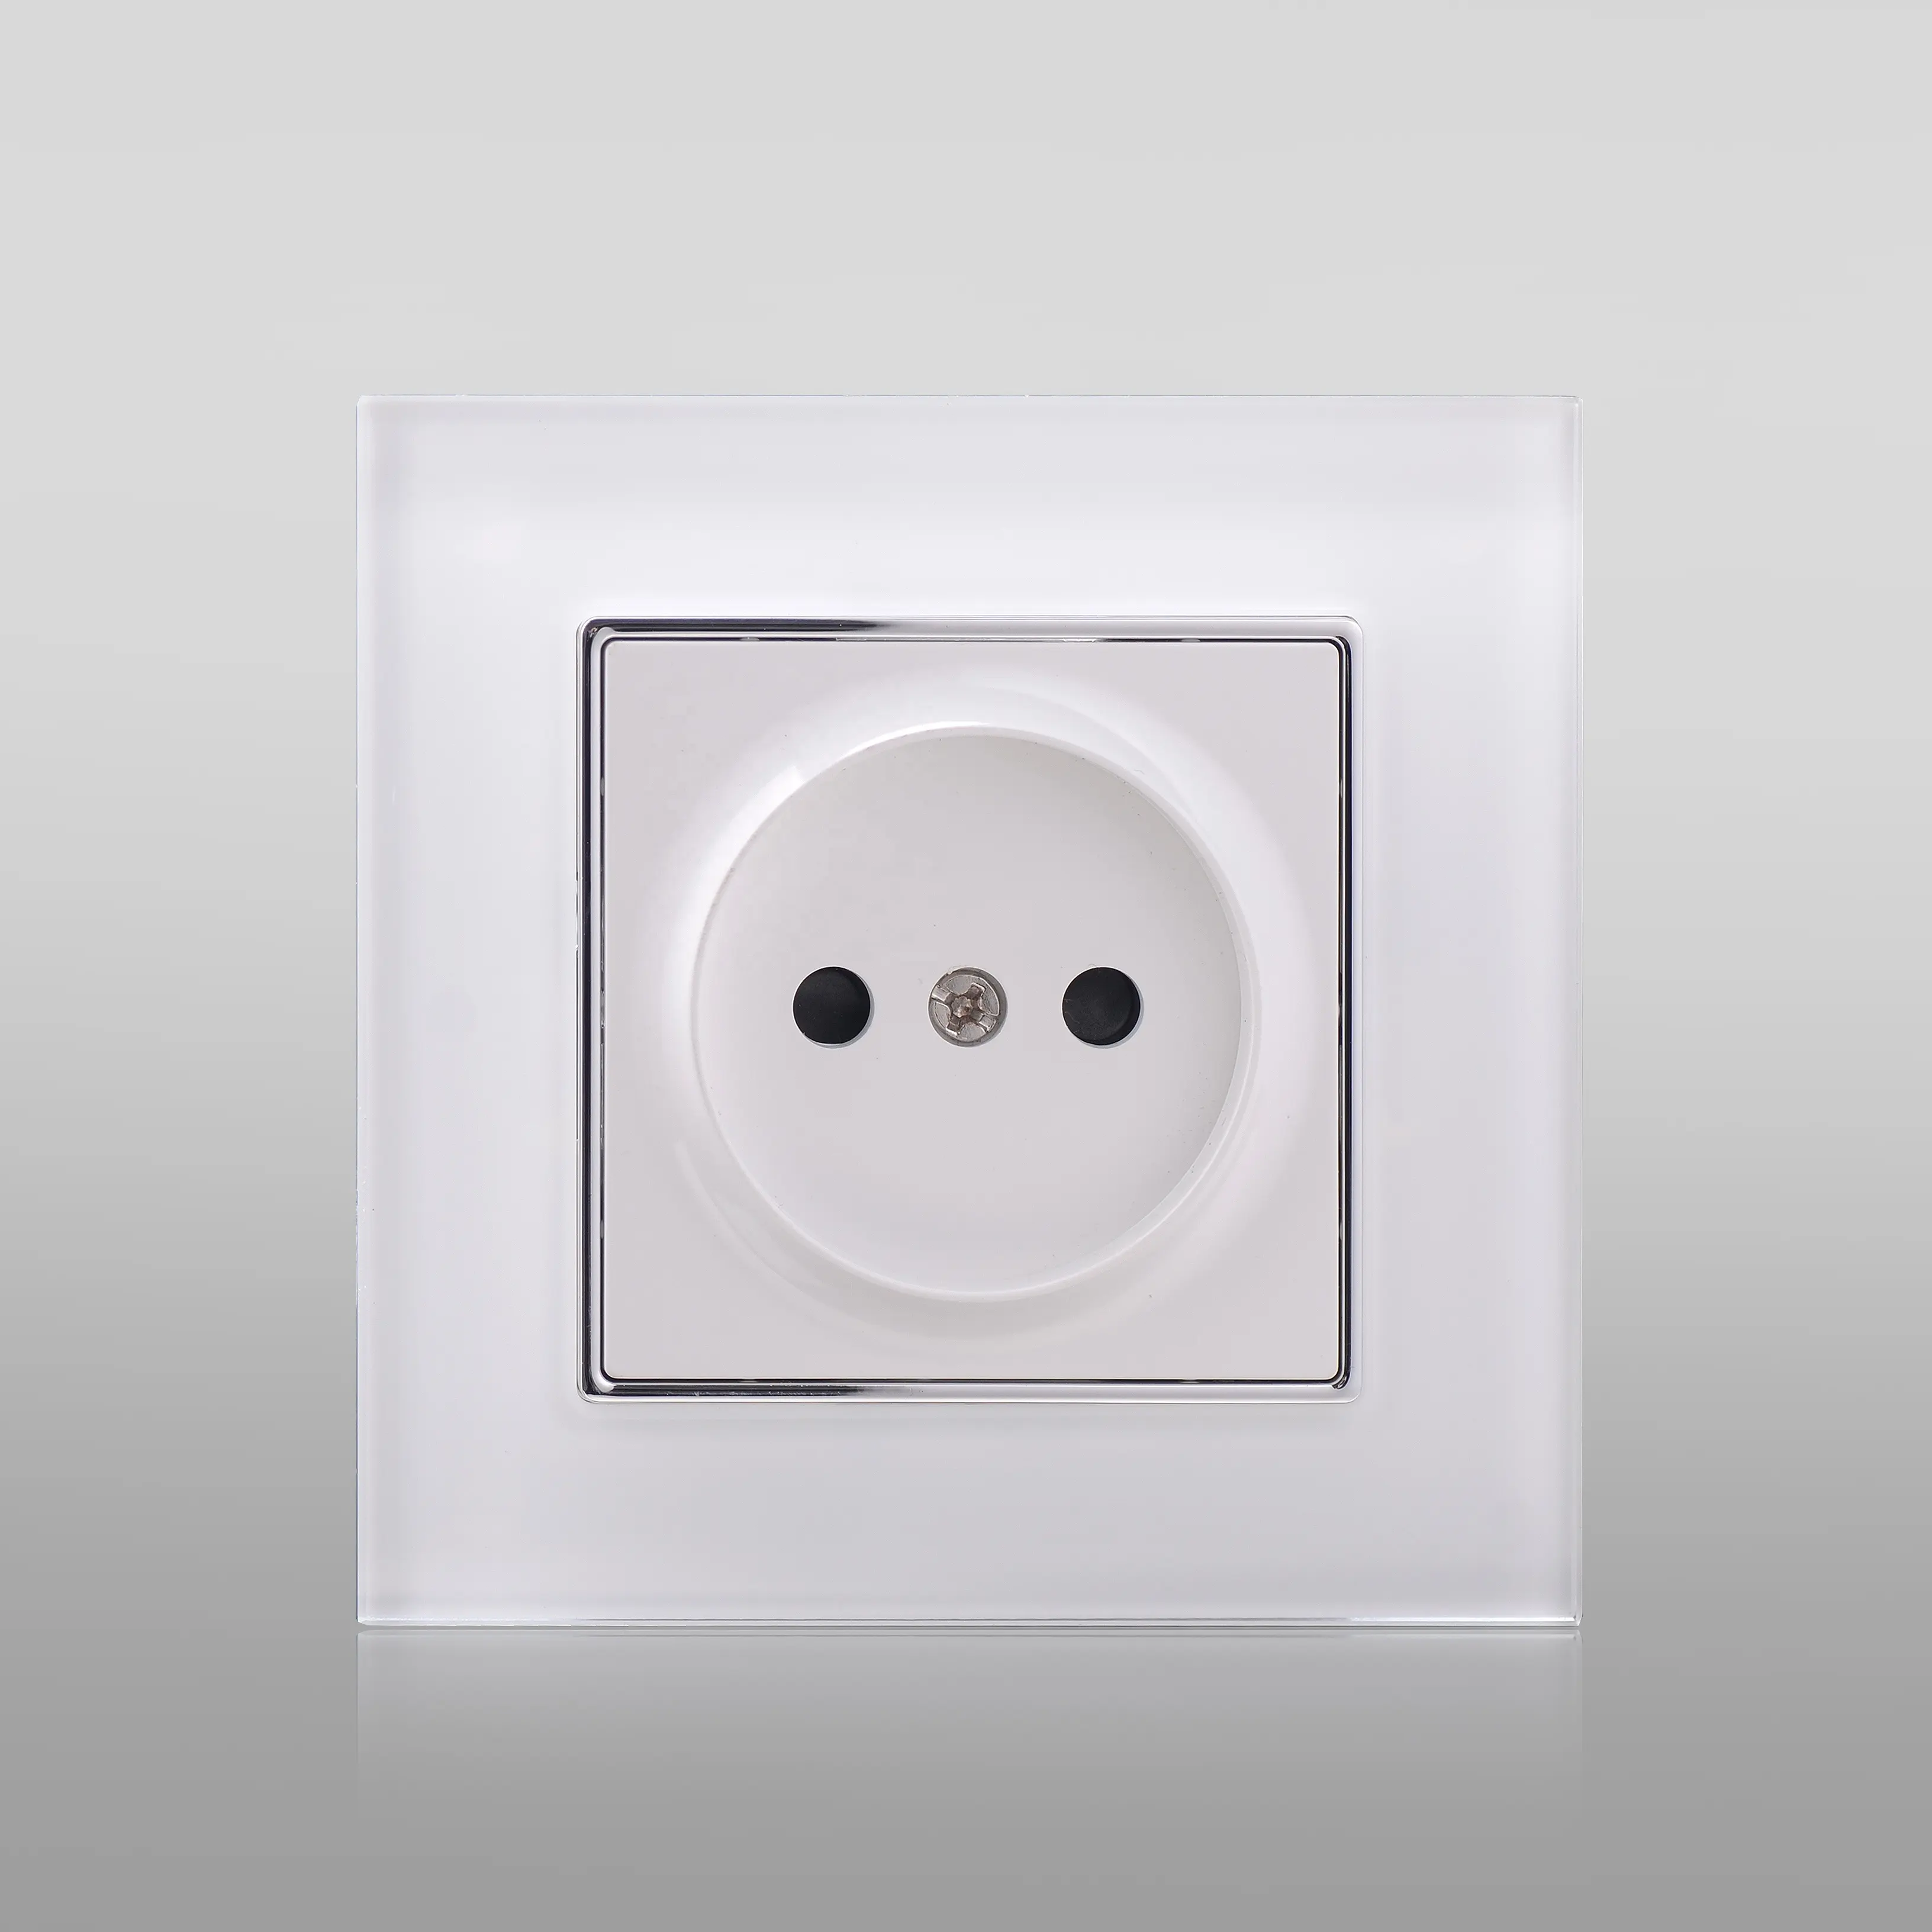 European style 2P socket without earth Russian Wall Socket 16A 250V wall electrical outlet wall socket